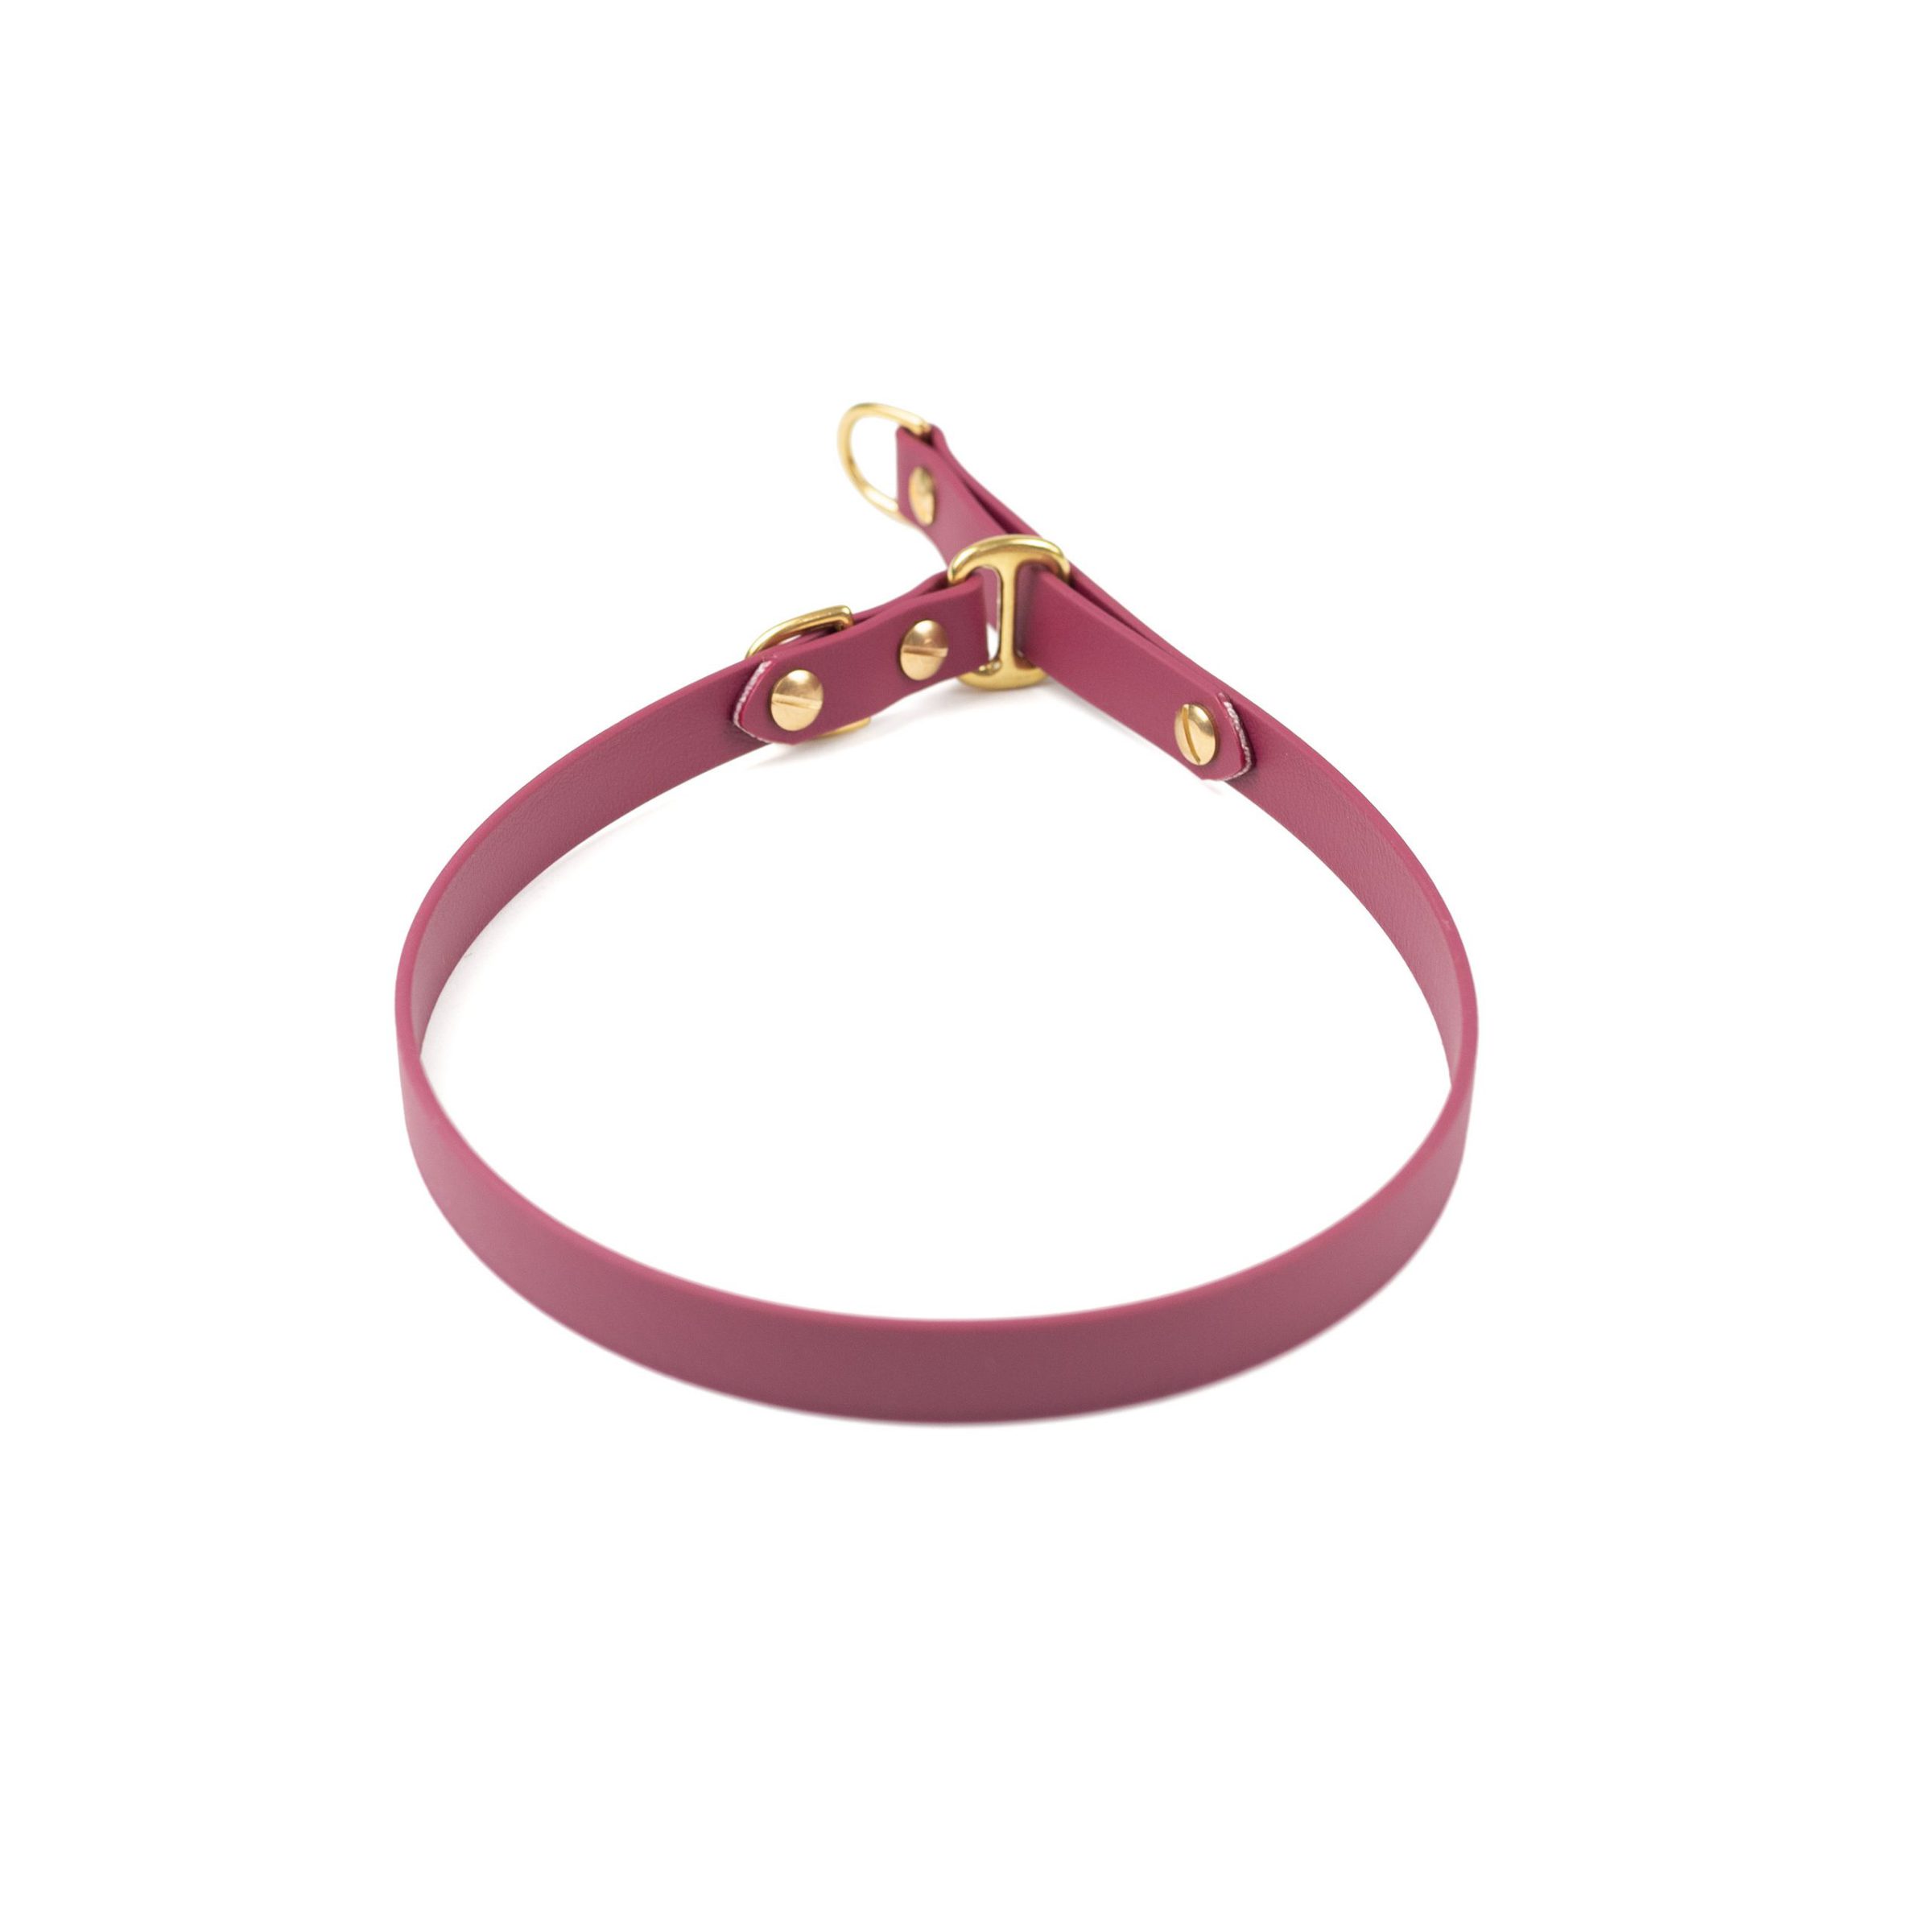 burgundy 5/8" classic limited slip collar in solid brass